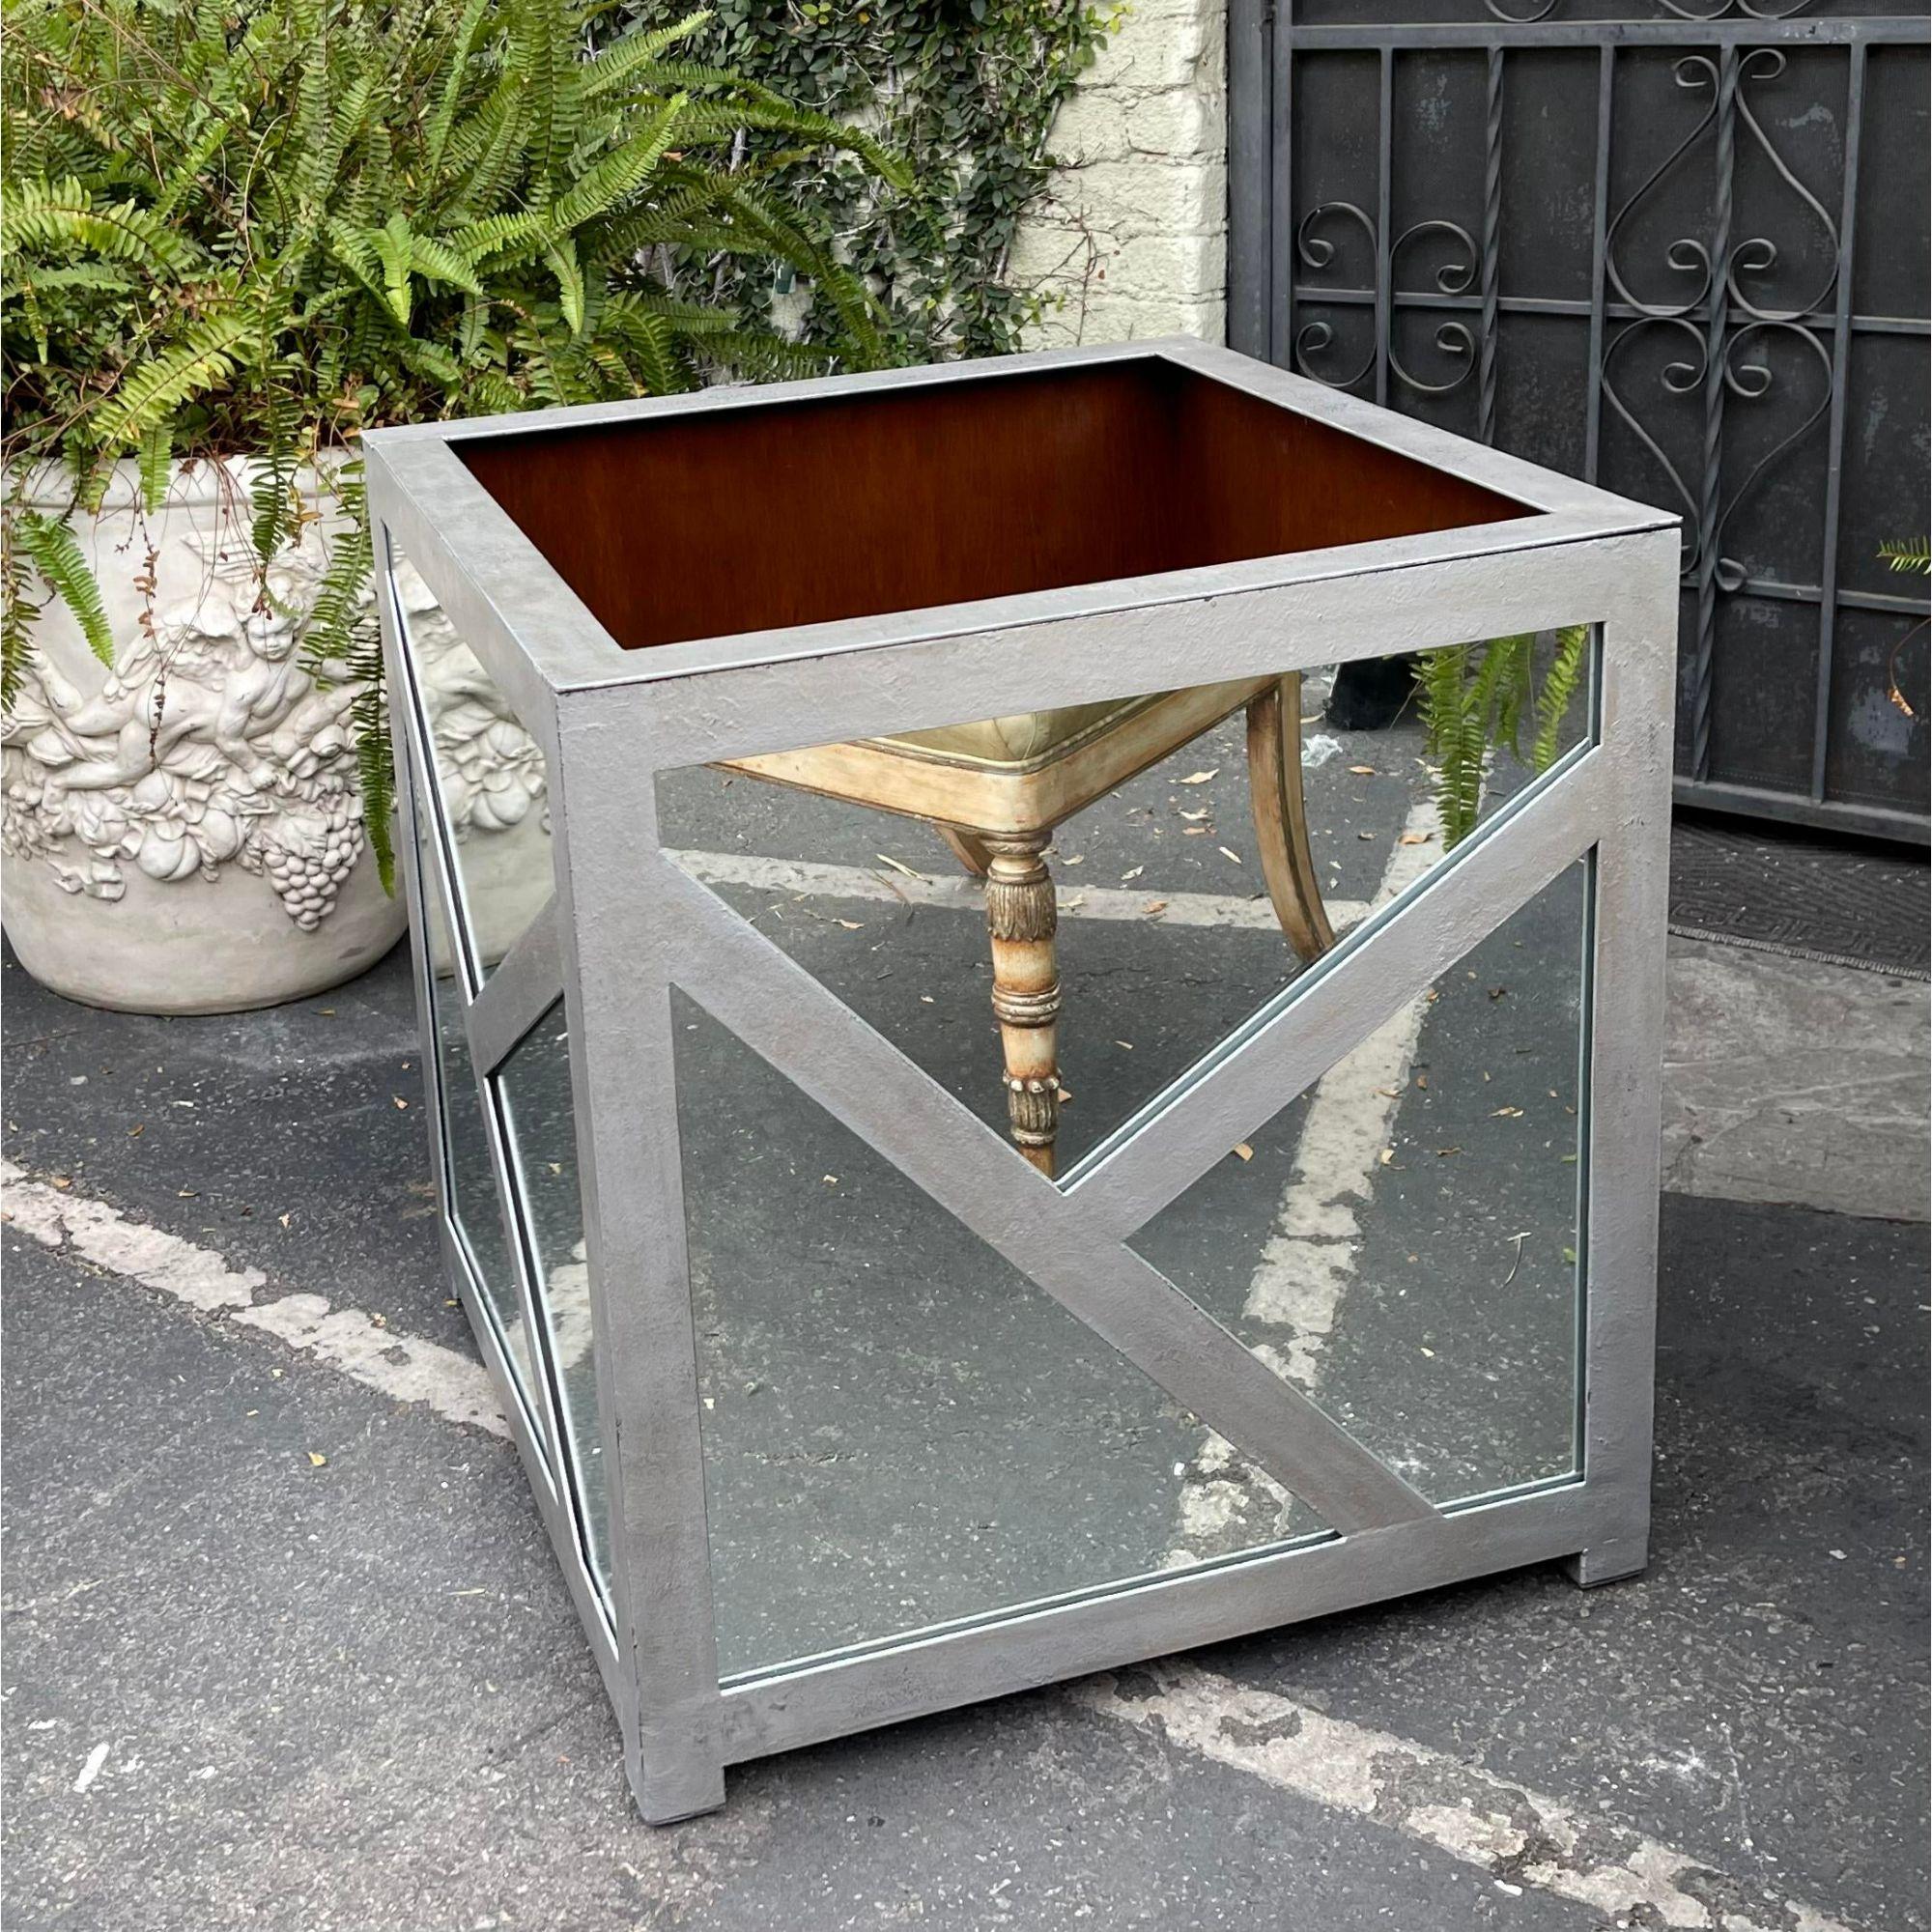 Art Deco Style mahogany lined mirrored iron planter.

Additional information:
Materials: Iron, Mahogany, Mirror
Please note that this item contains materials that are legally subject to a special export process that may extend the delivery time